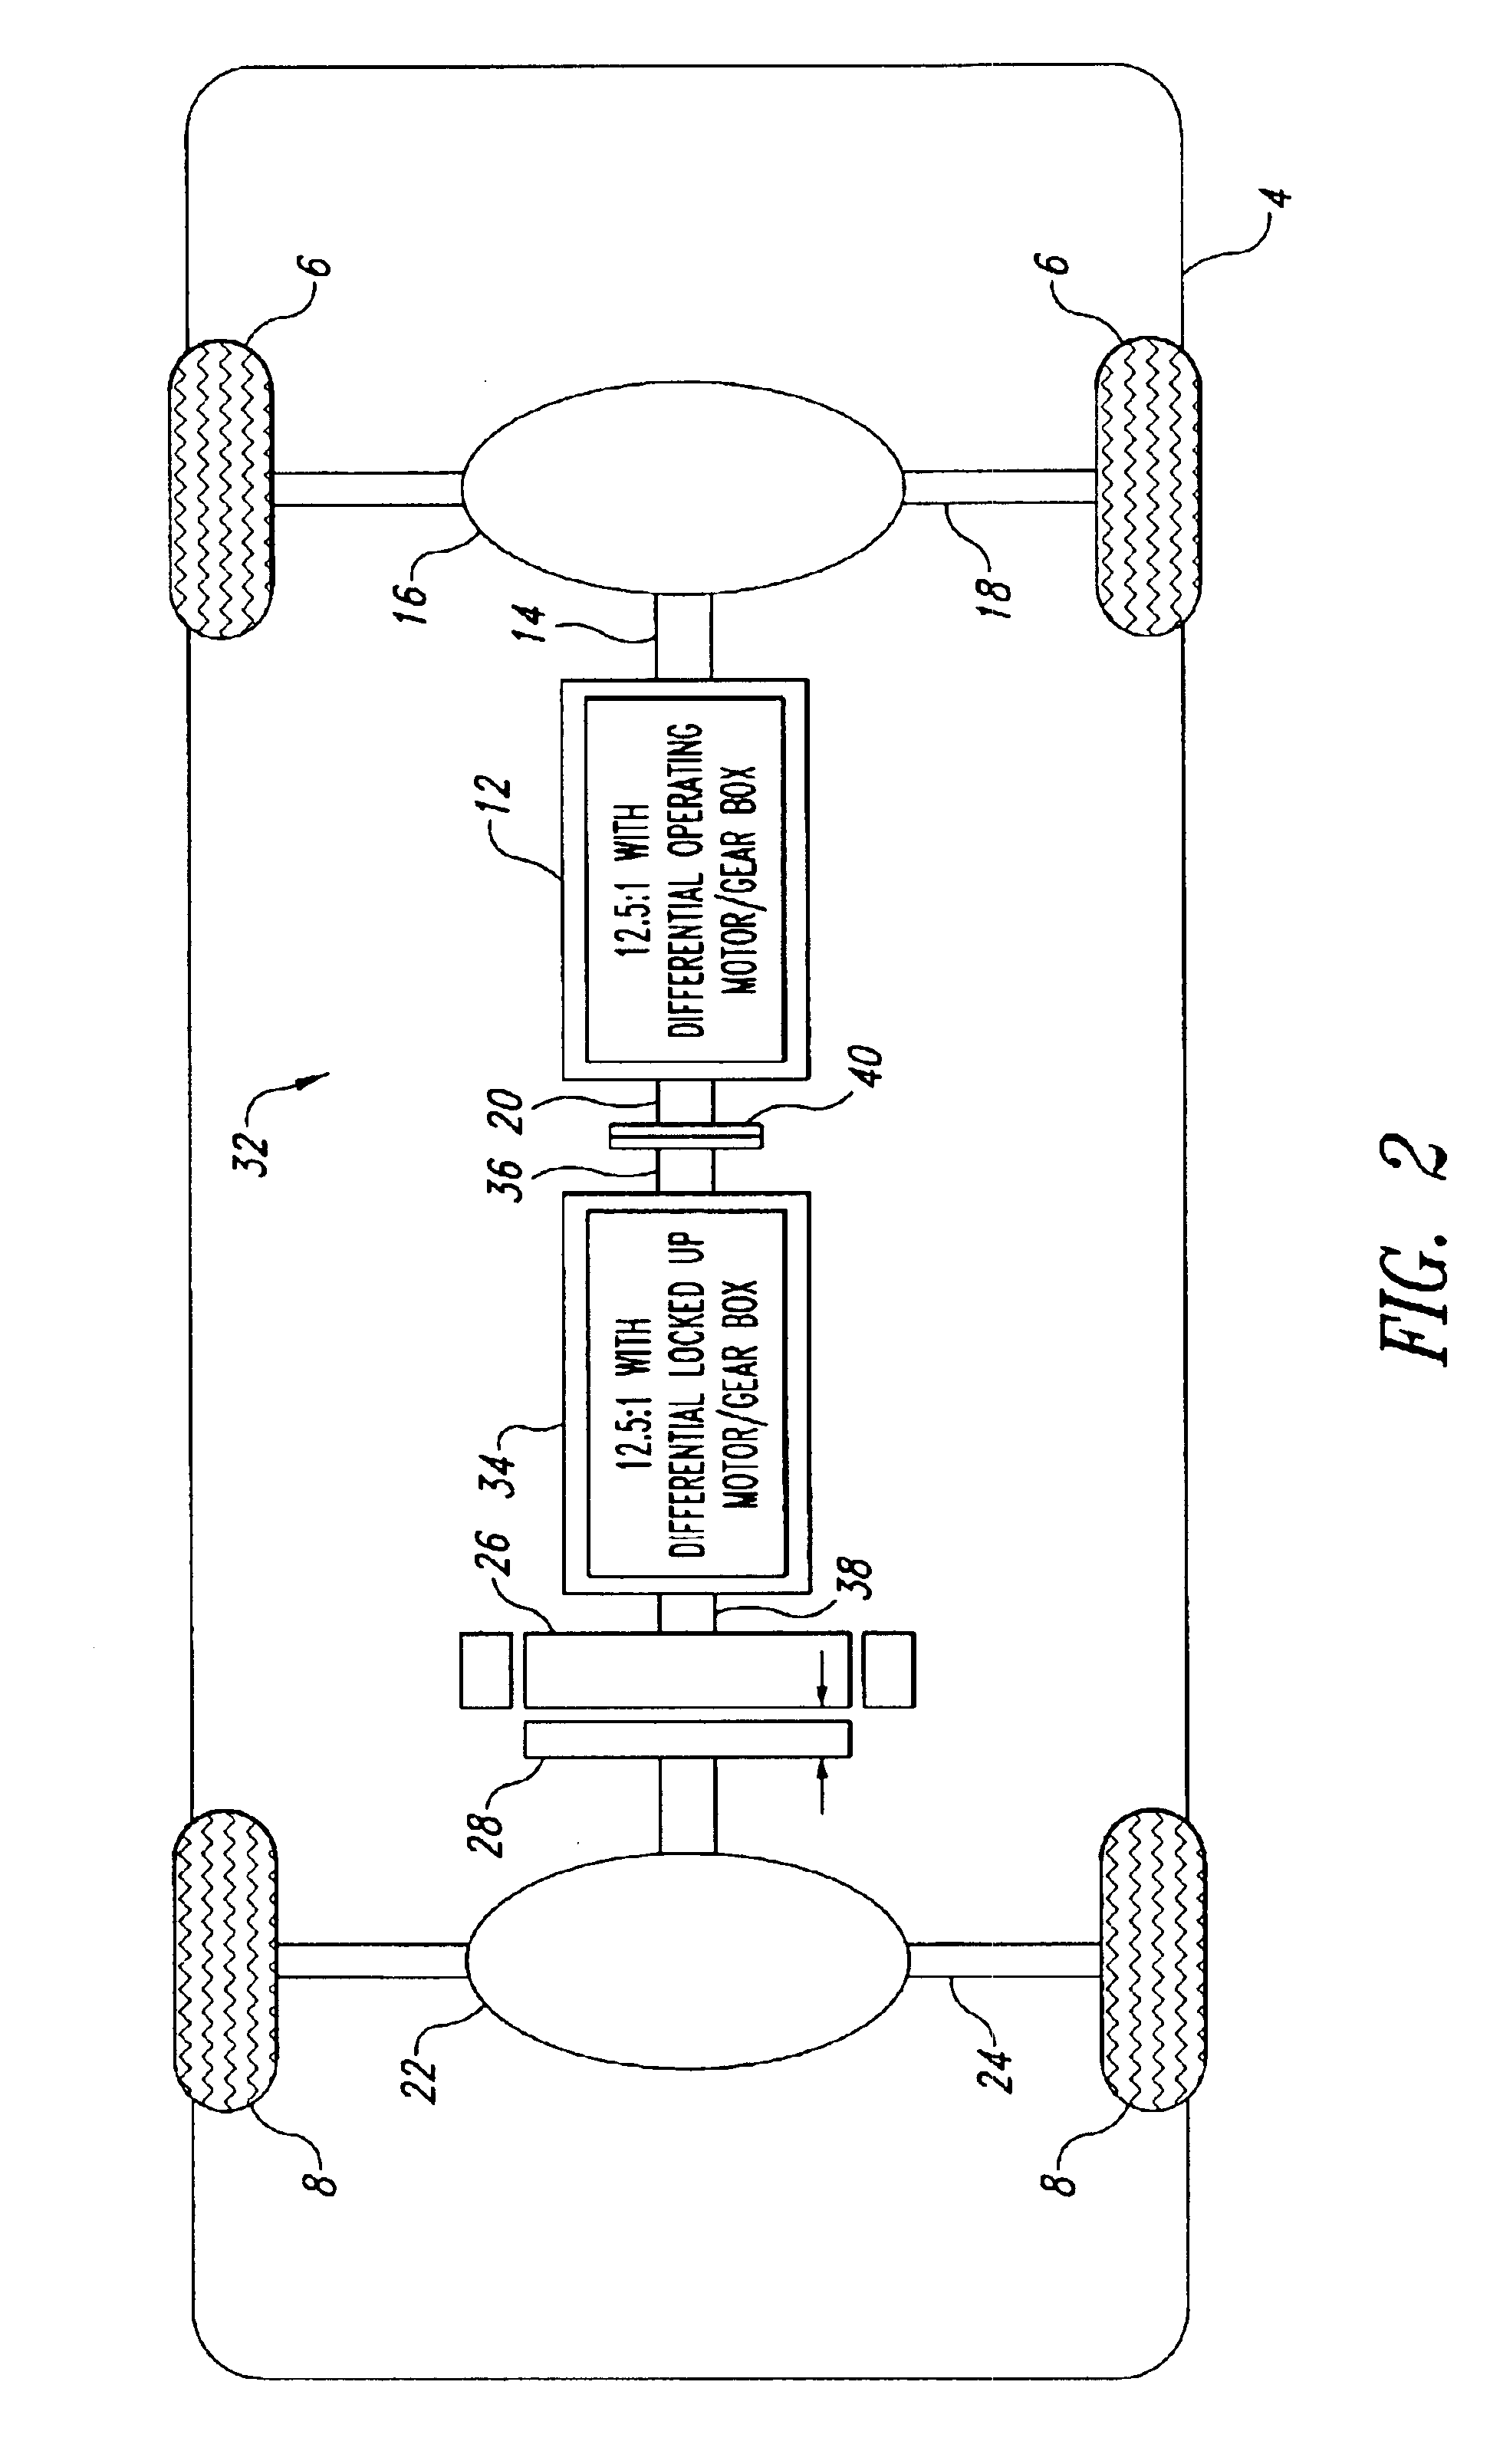 Apparatus and method to achieve multiple effective ratios from a fixed ratio transaxle